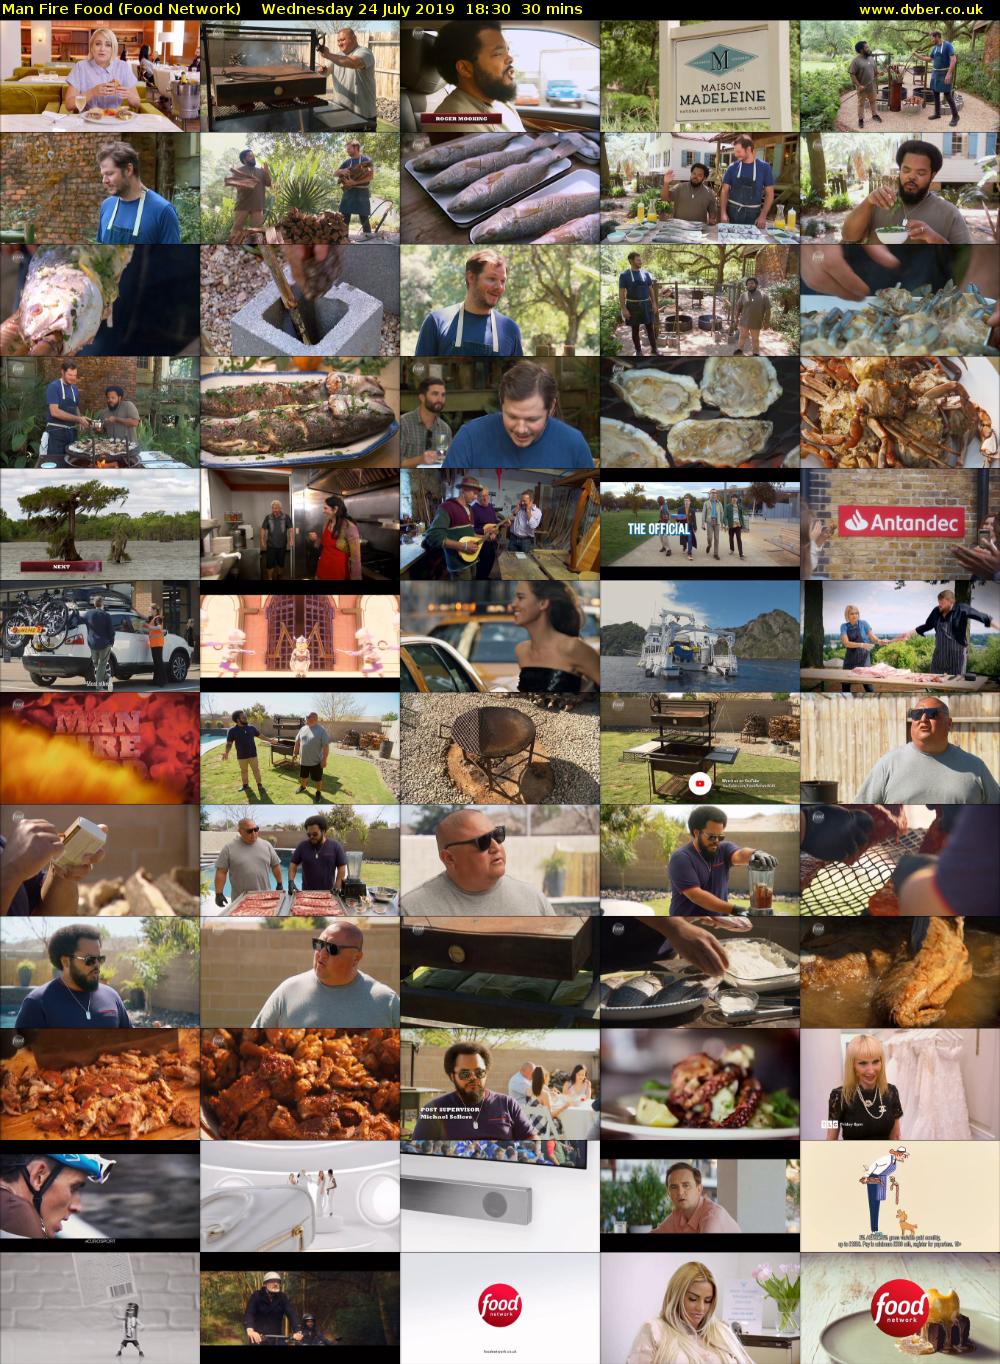 Man Fire Food (Food Network) Wednesday 24 July 2019 18:30 - 19:00